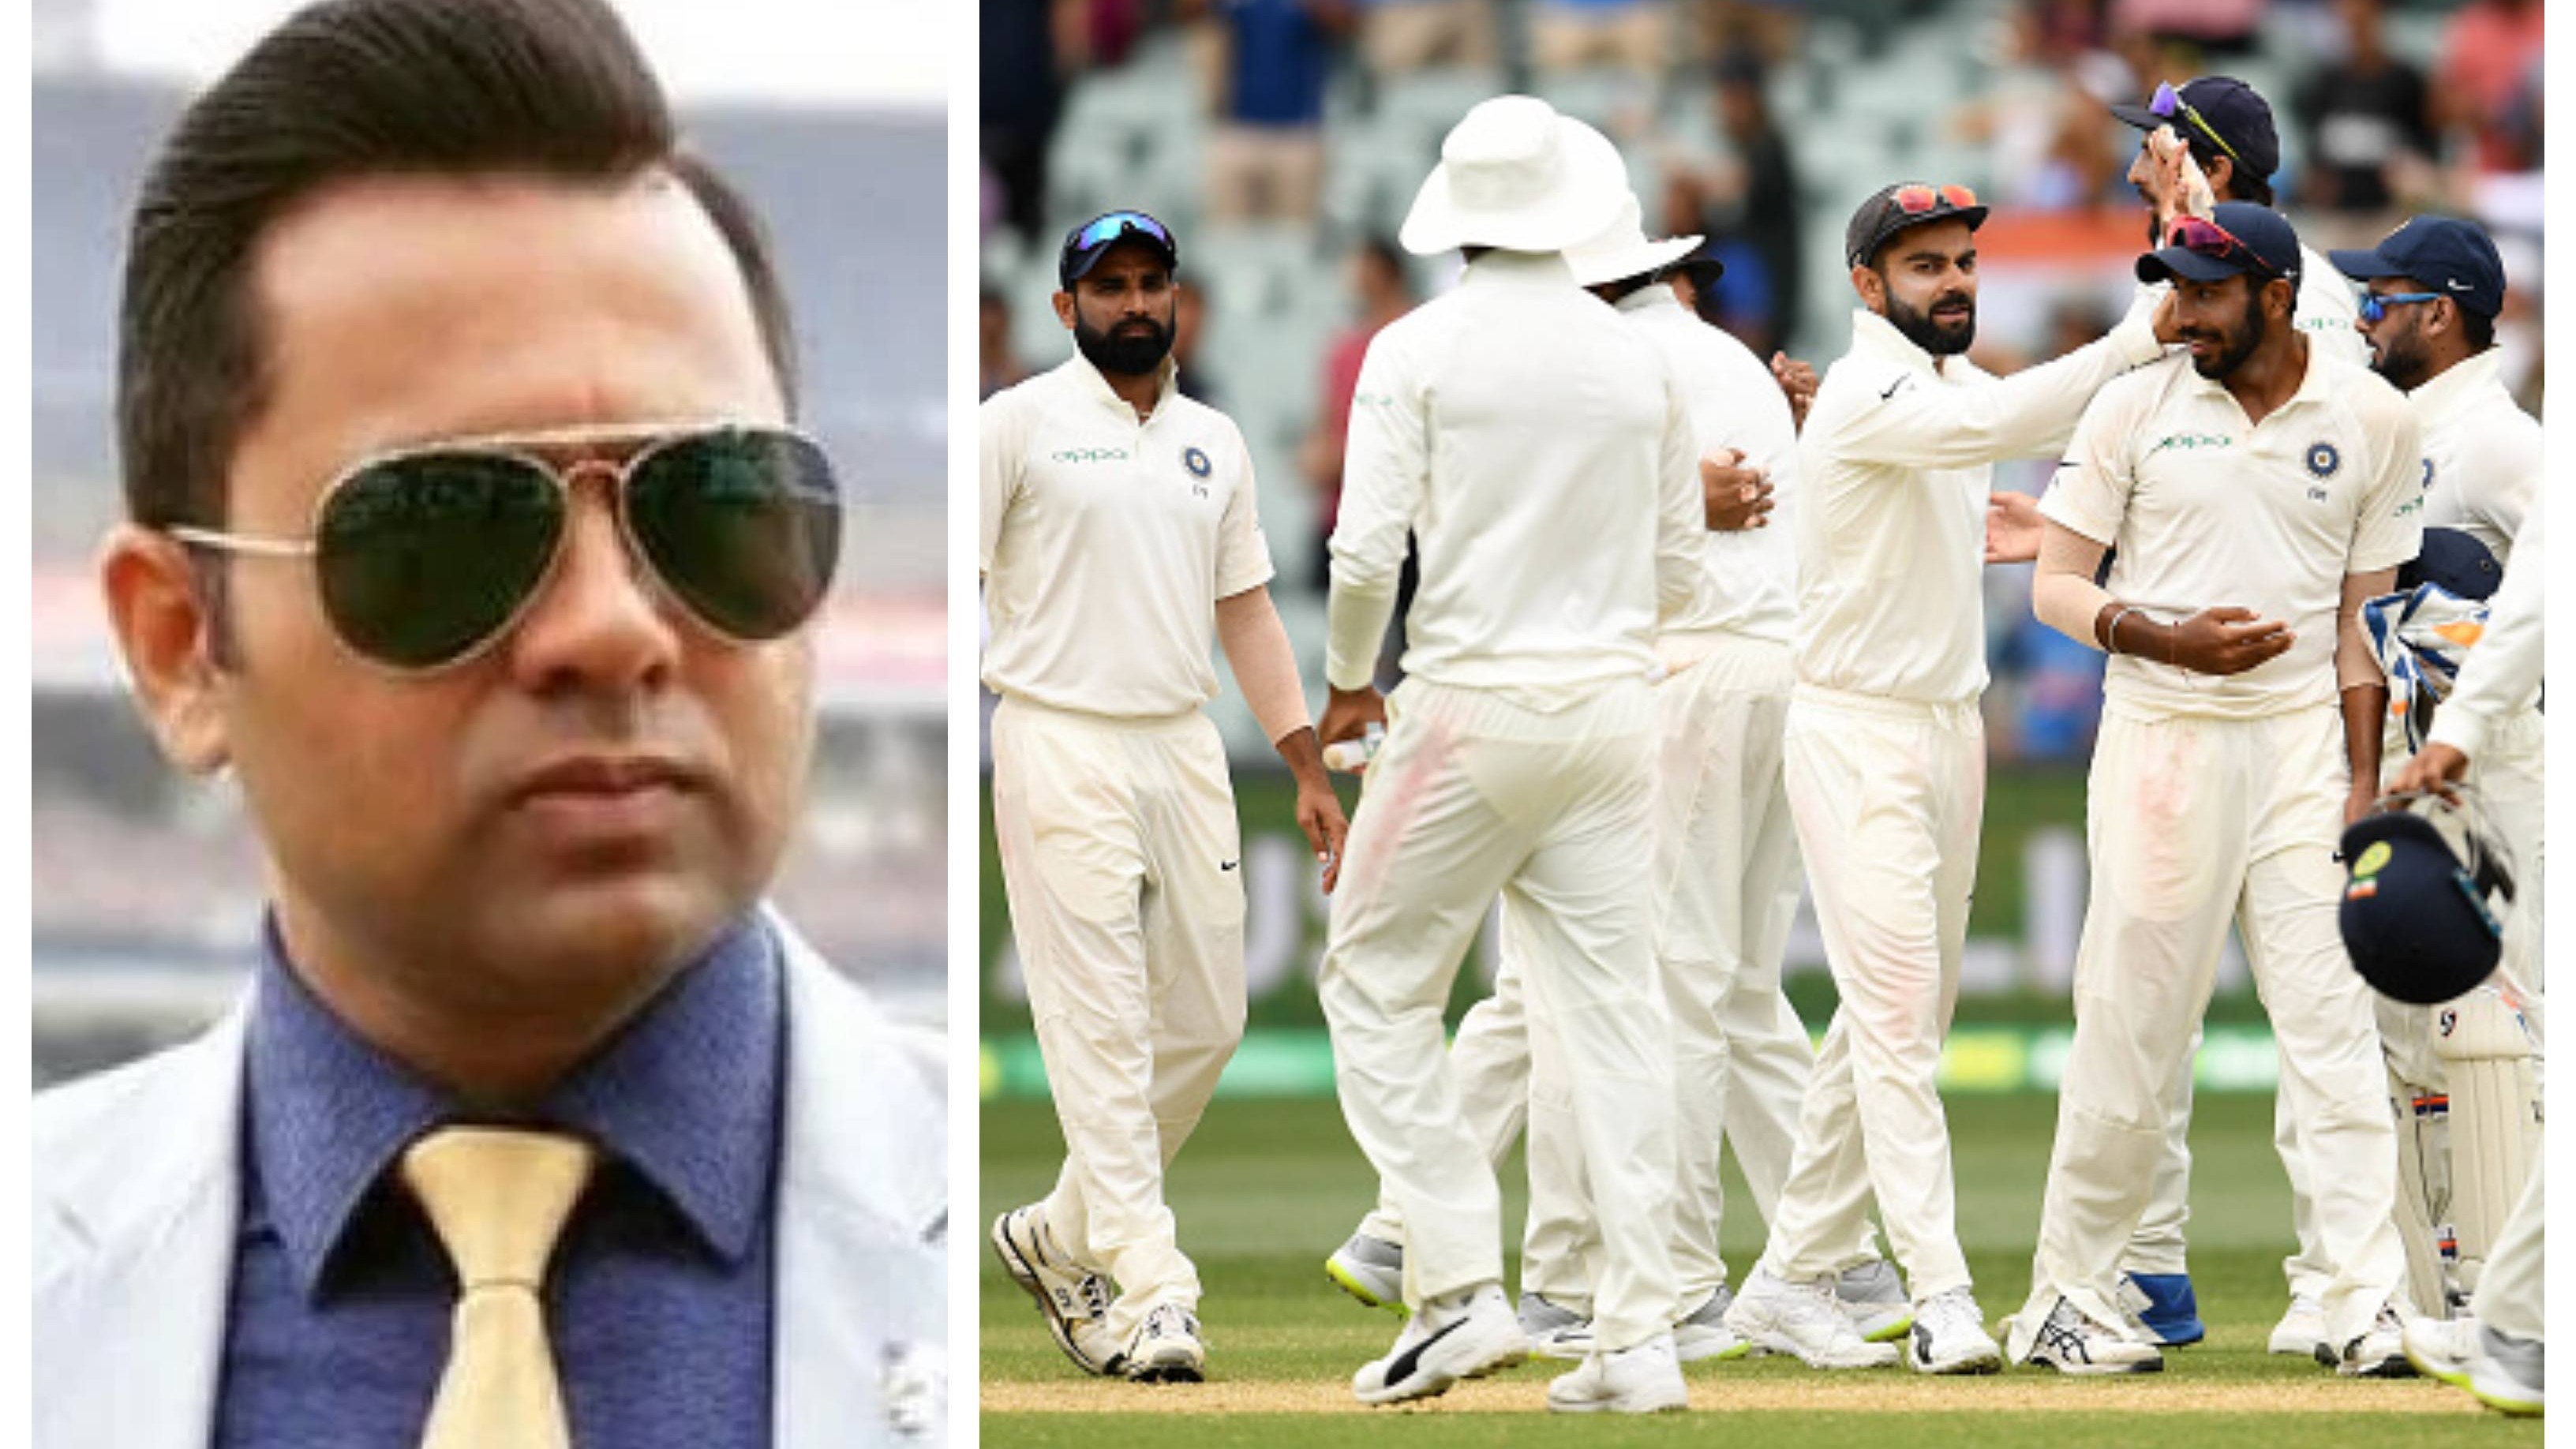 AUS V IND 2020-21: ‘India should not have agreed to play pink ball Test in Adelaide’, says Aakash Chopra